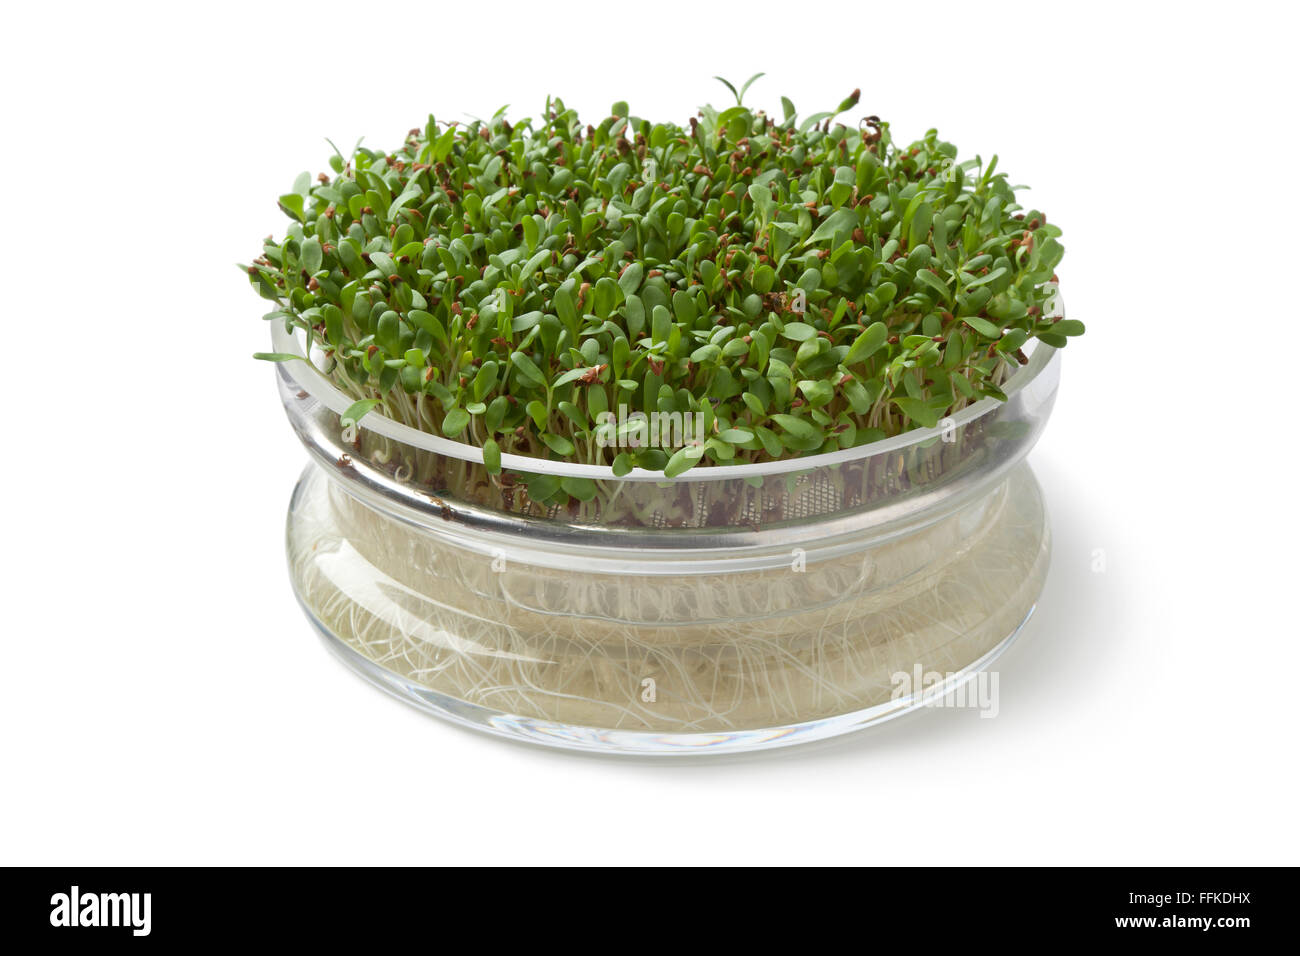 Fresh Alfalfa sprouts growing in a glass container on white background Stock Photo